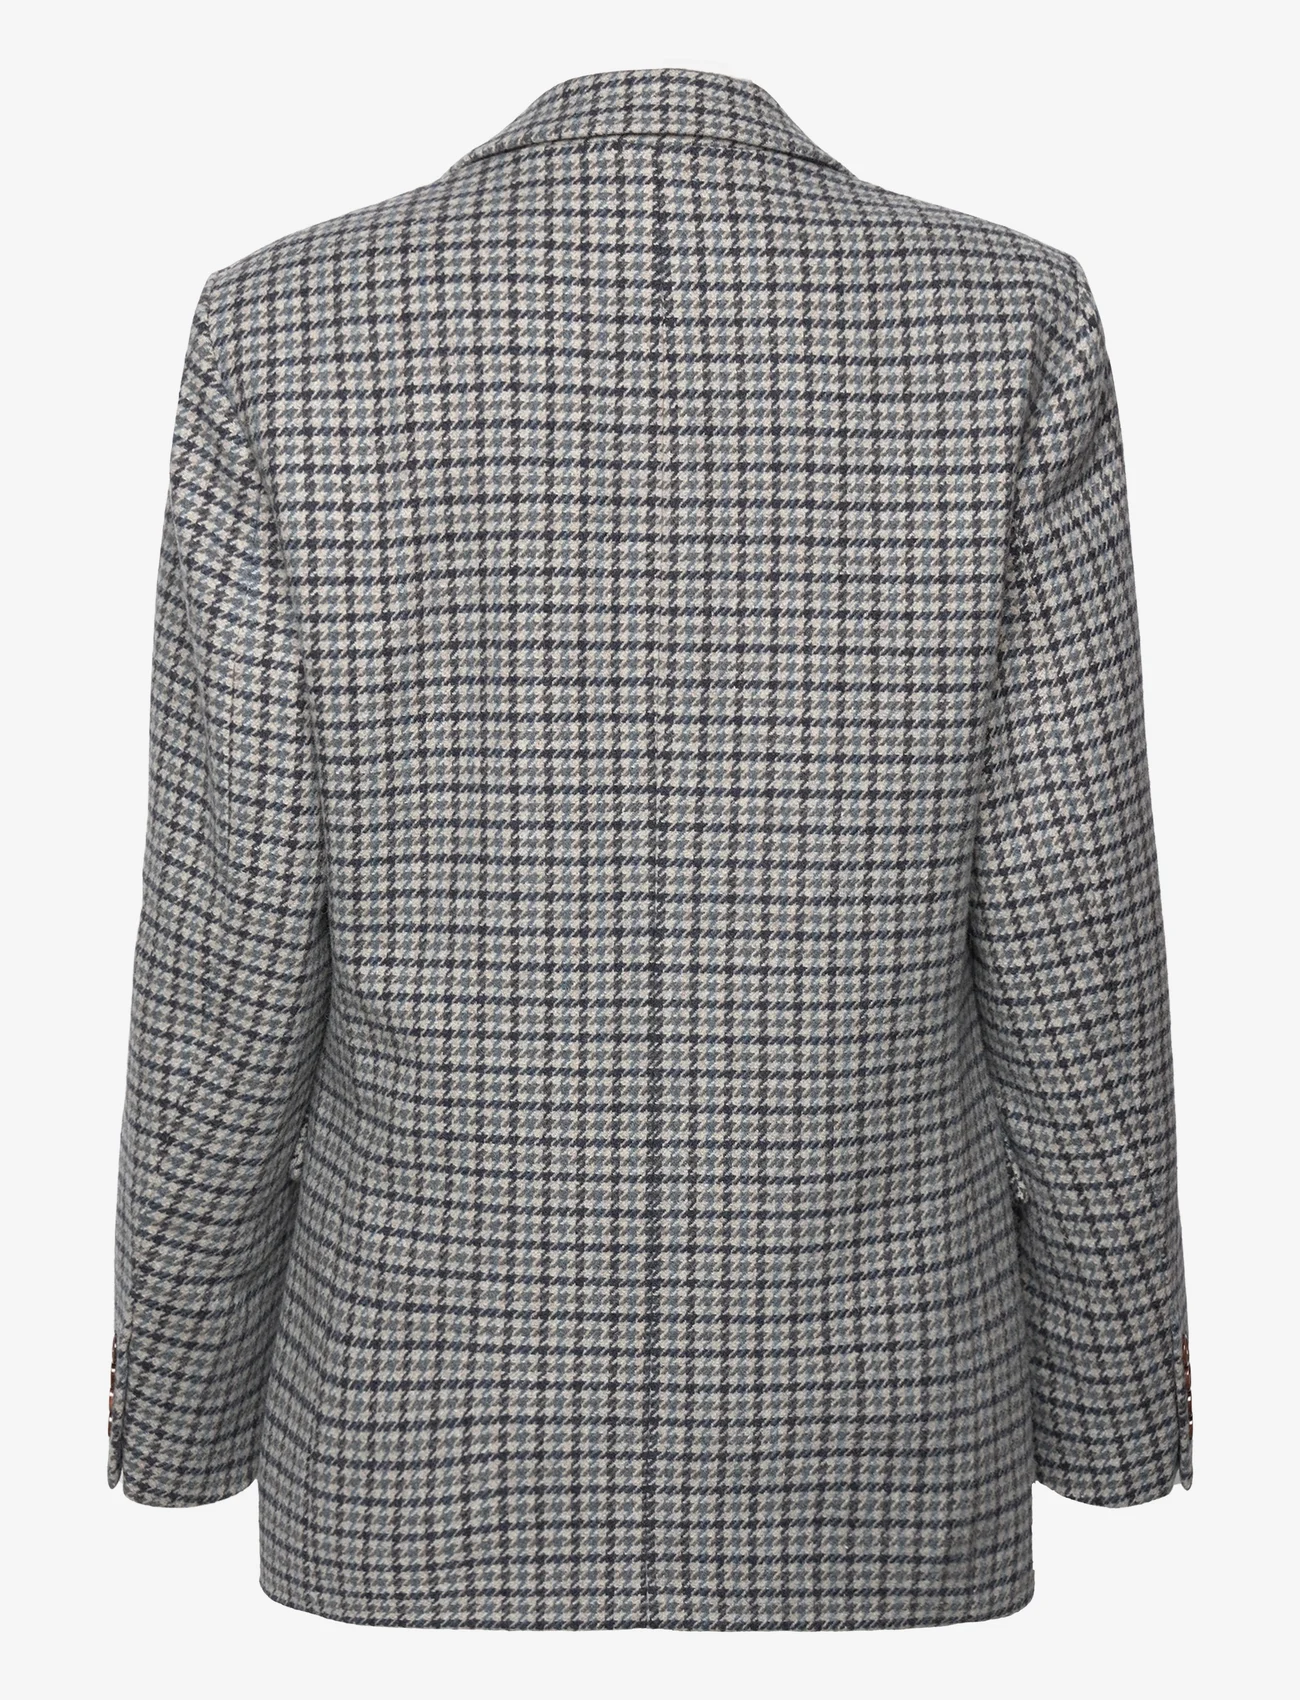 Tommy Hilfiger - OVERSIZED WOOL CHECK SB BLAZER - party wear at outlet prices - houndstooth blue grey - 1